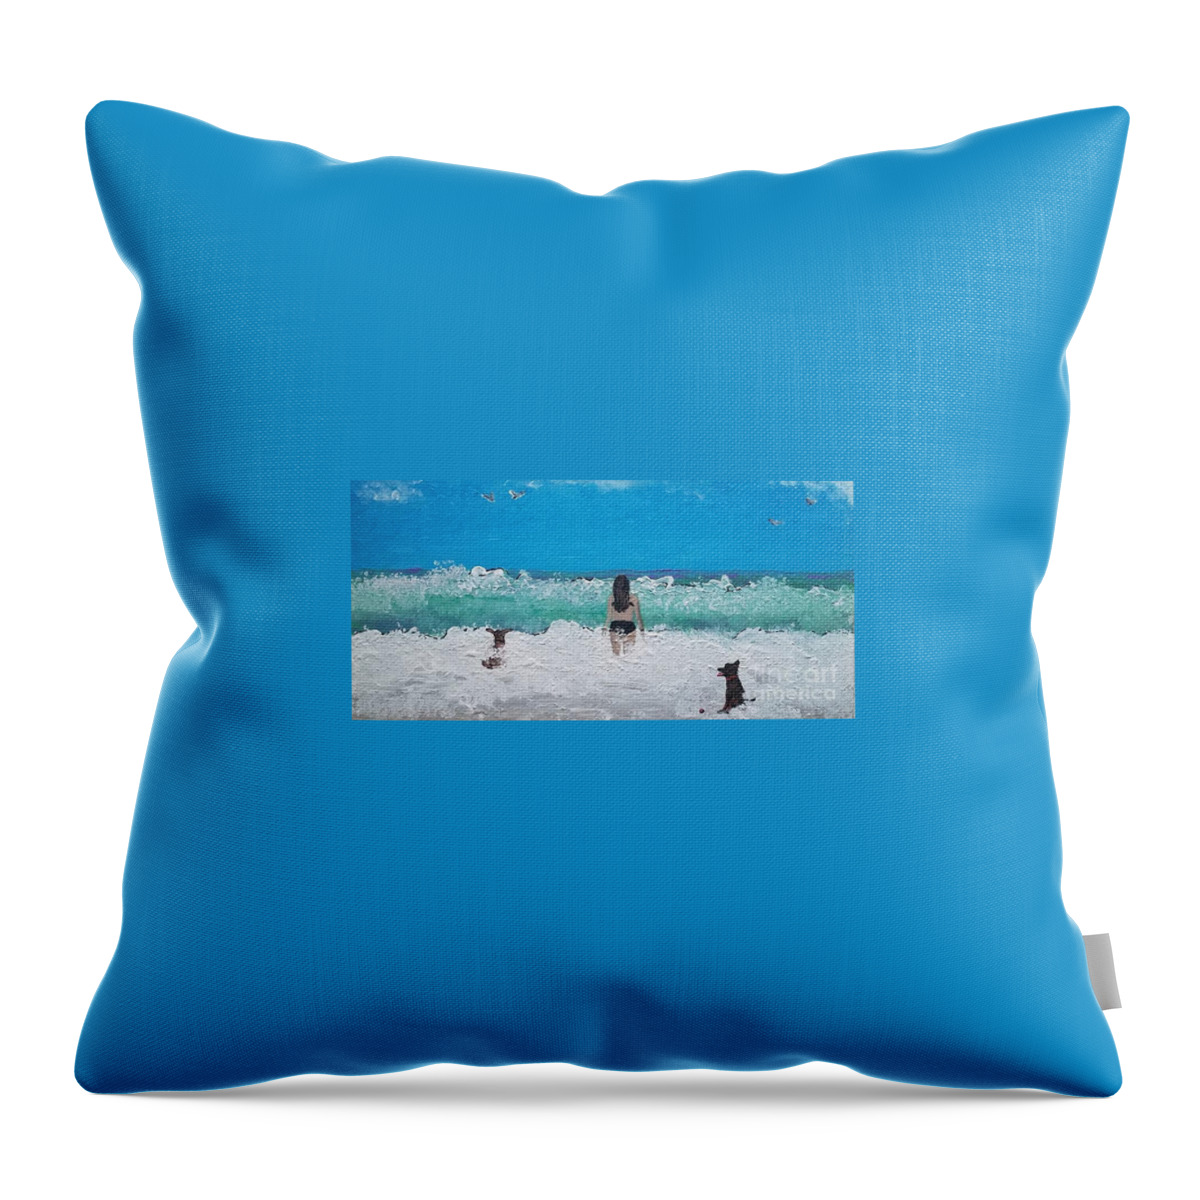  Throw Pillow featuring the painting The Wading into the Waves by Mark SanSouci